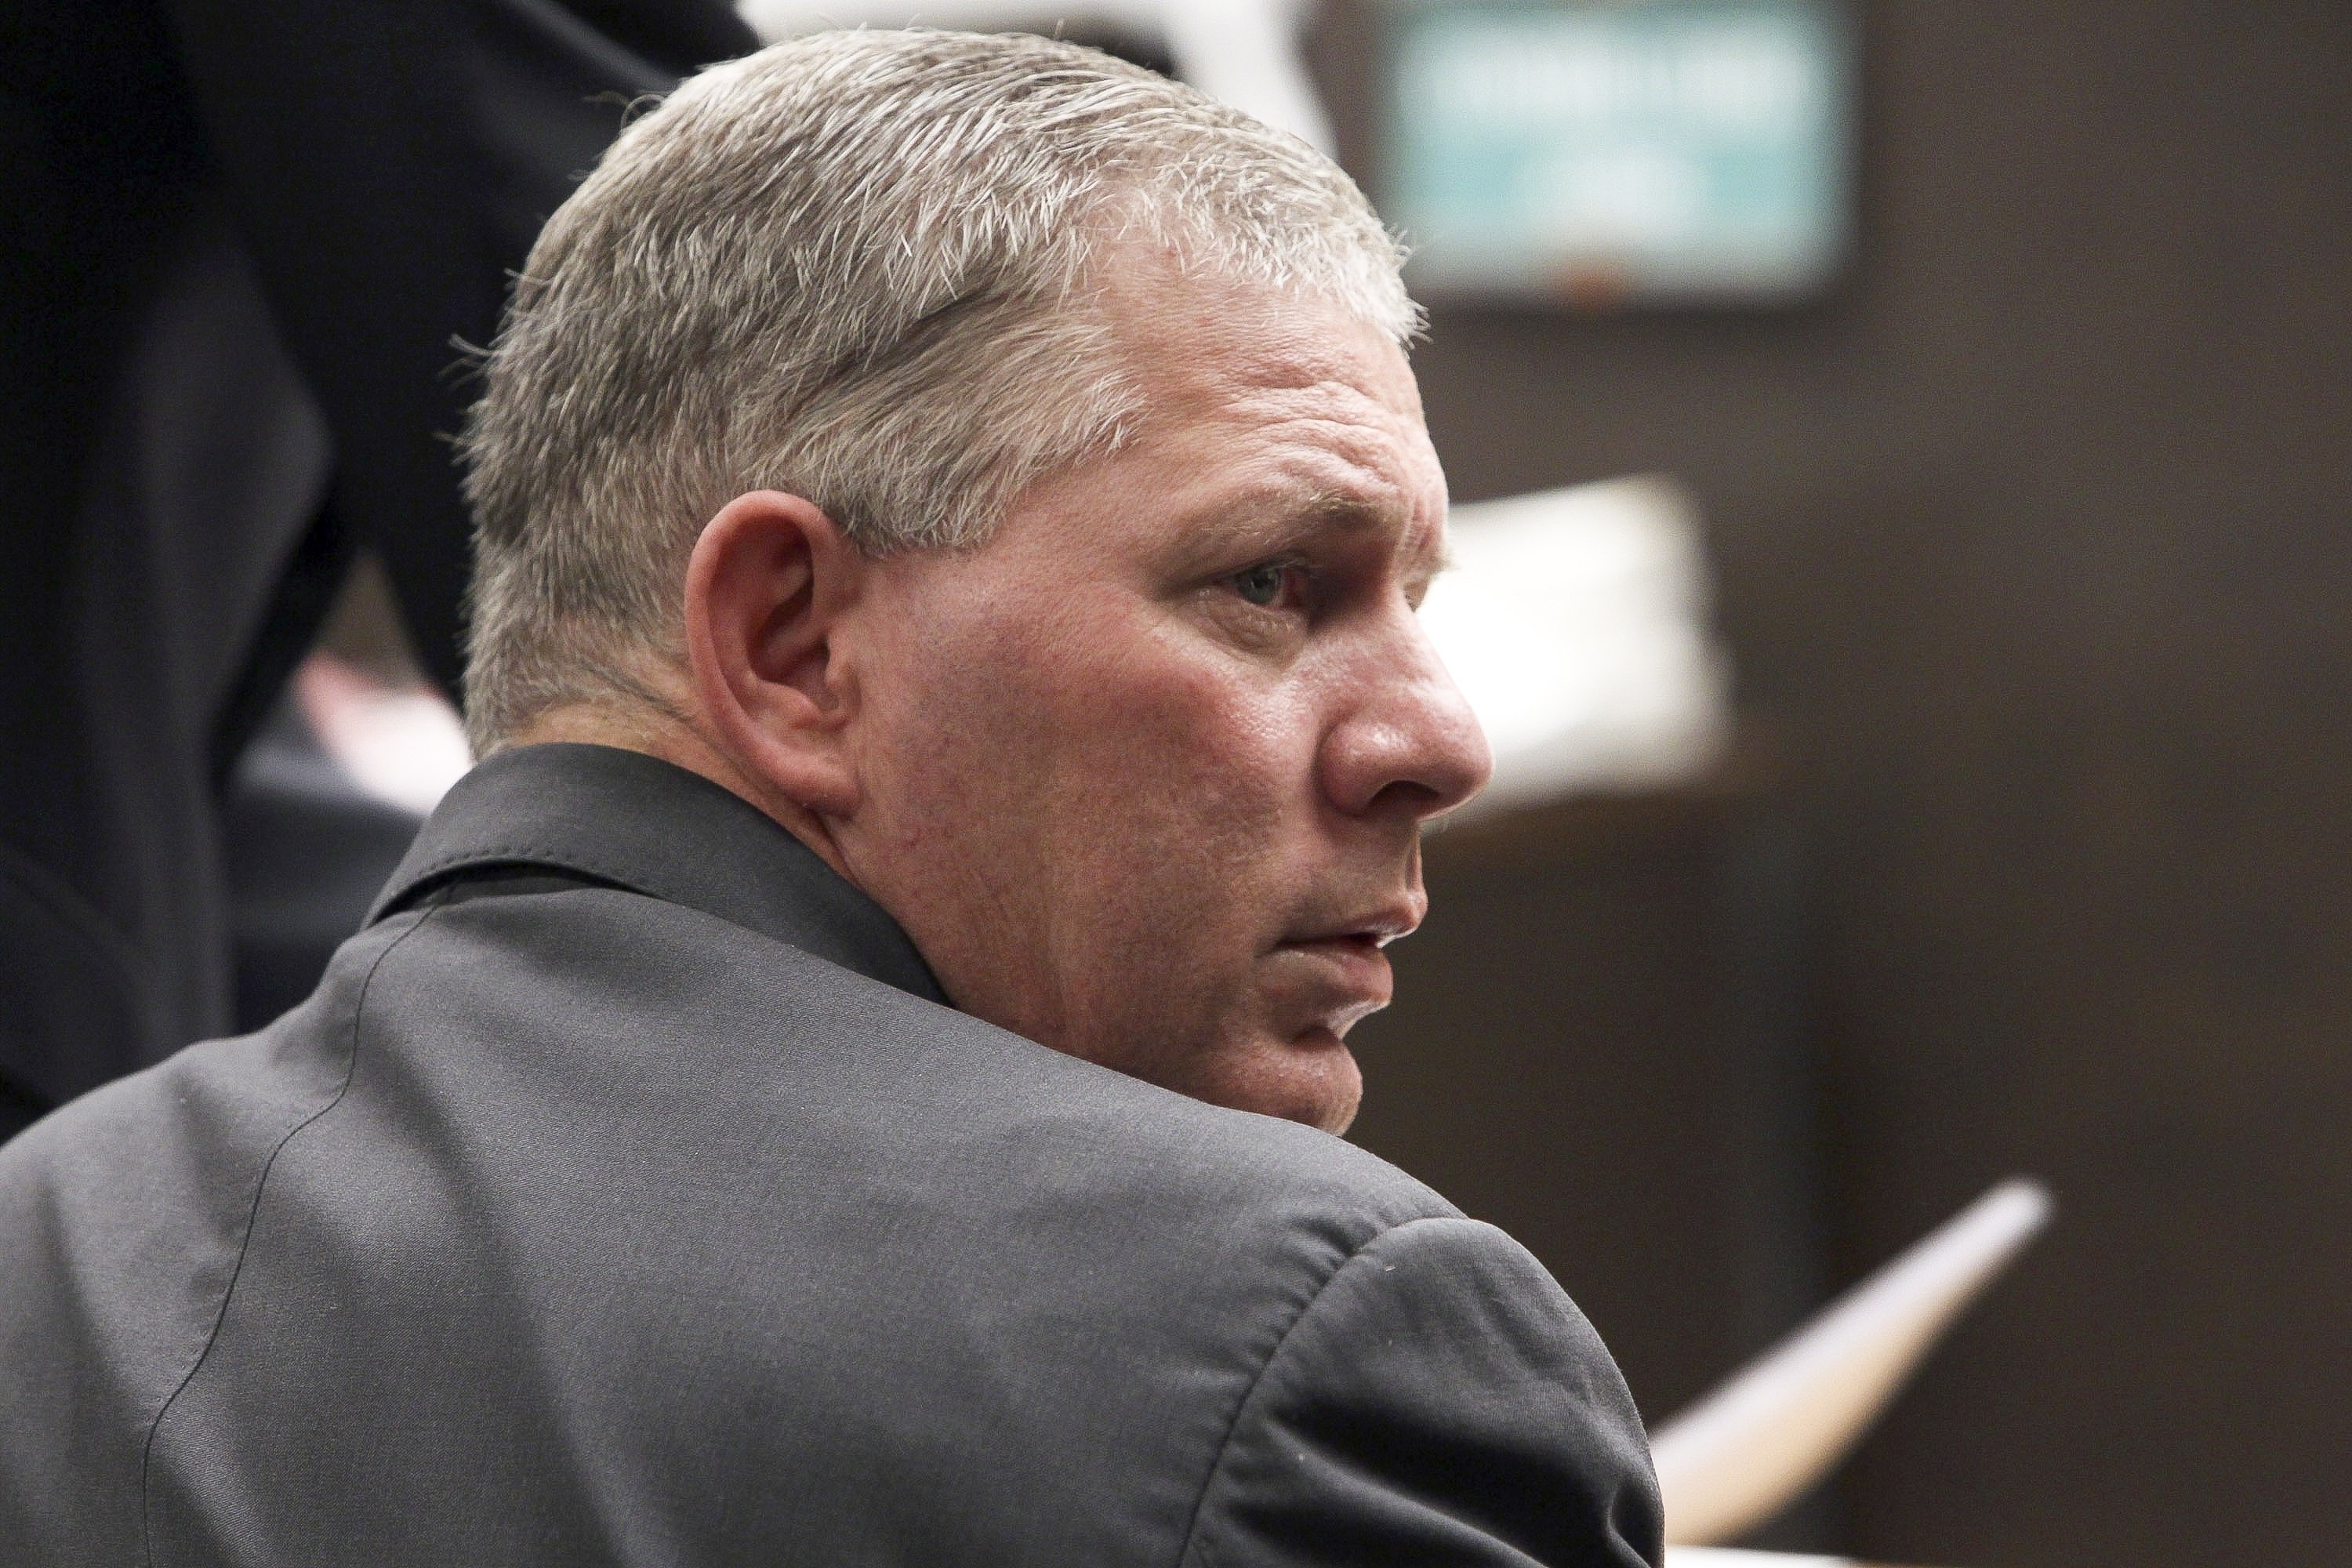 former-mlb-star-lenny-dykstra-indicted-for-drugs-threats-ap-news